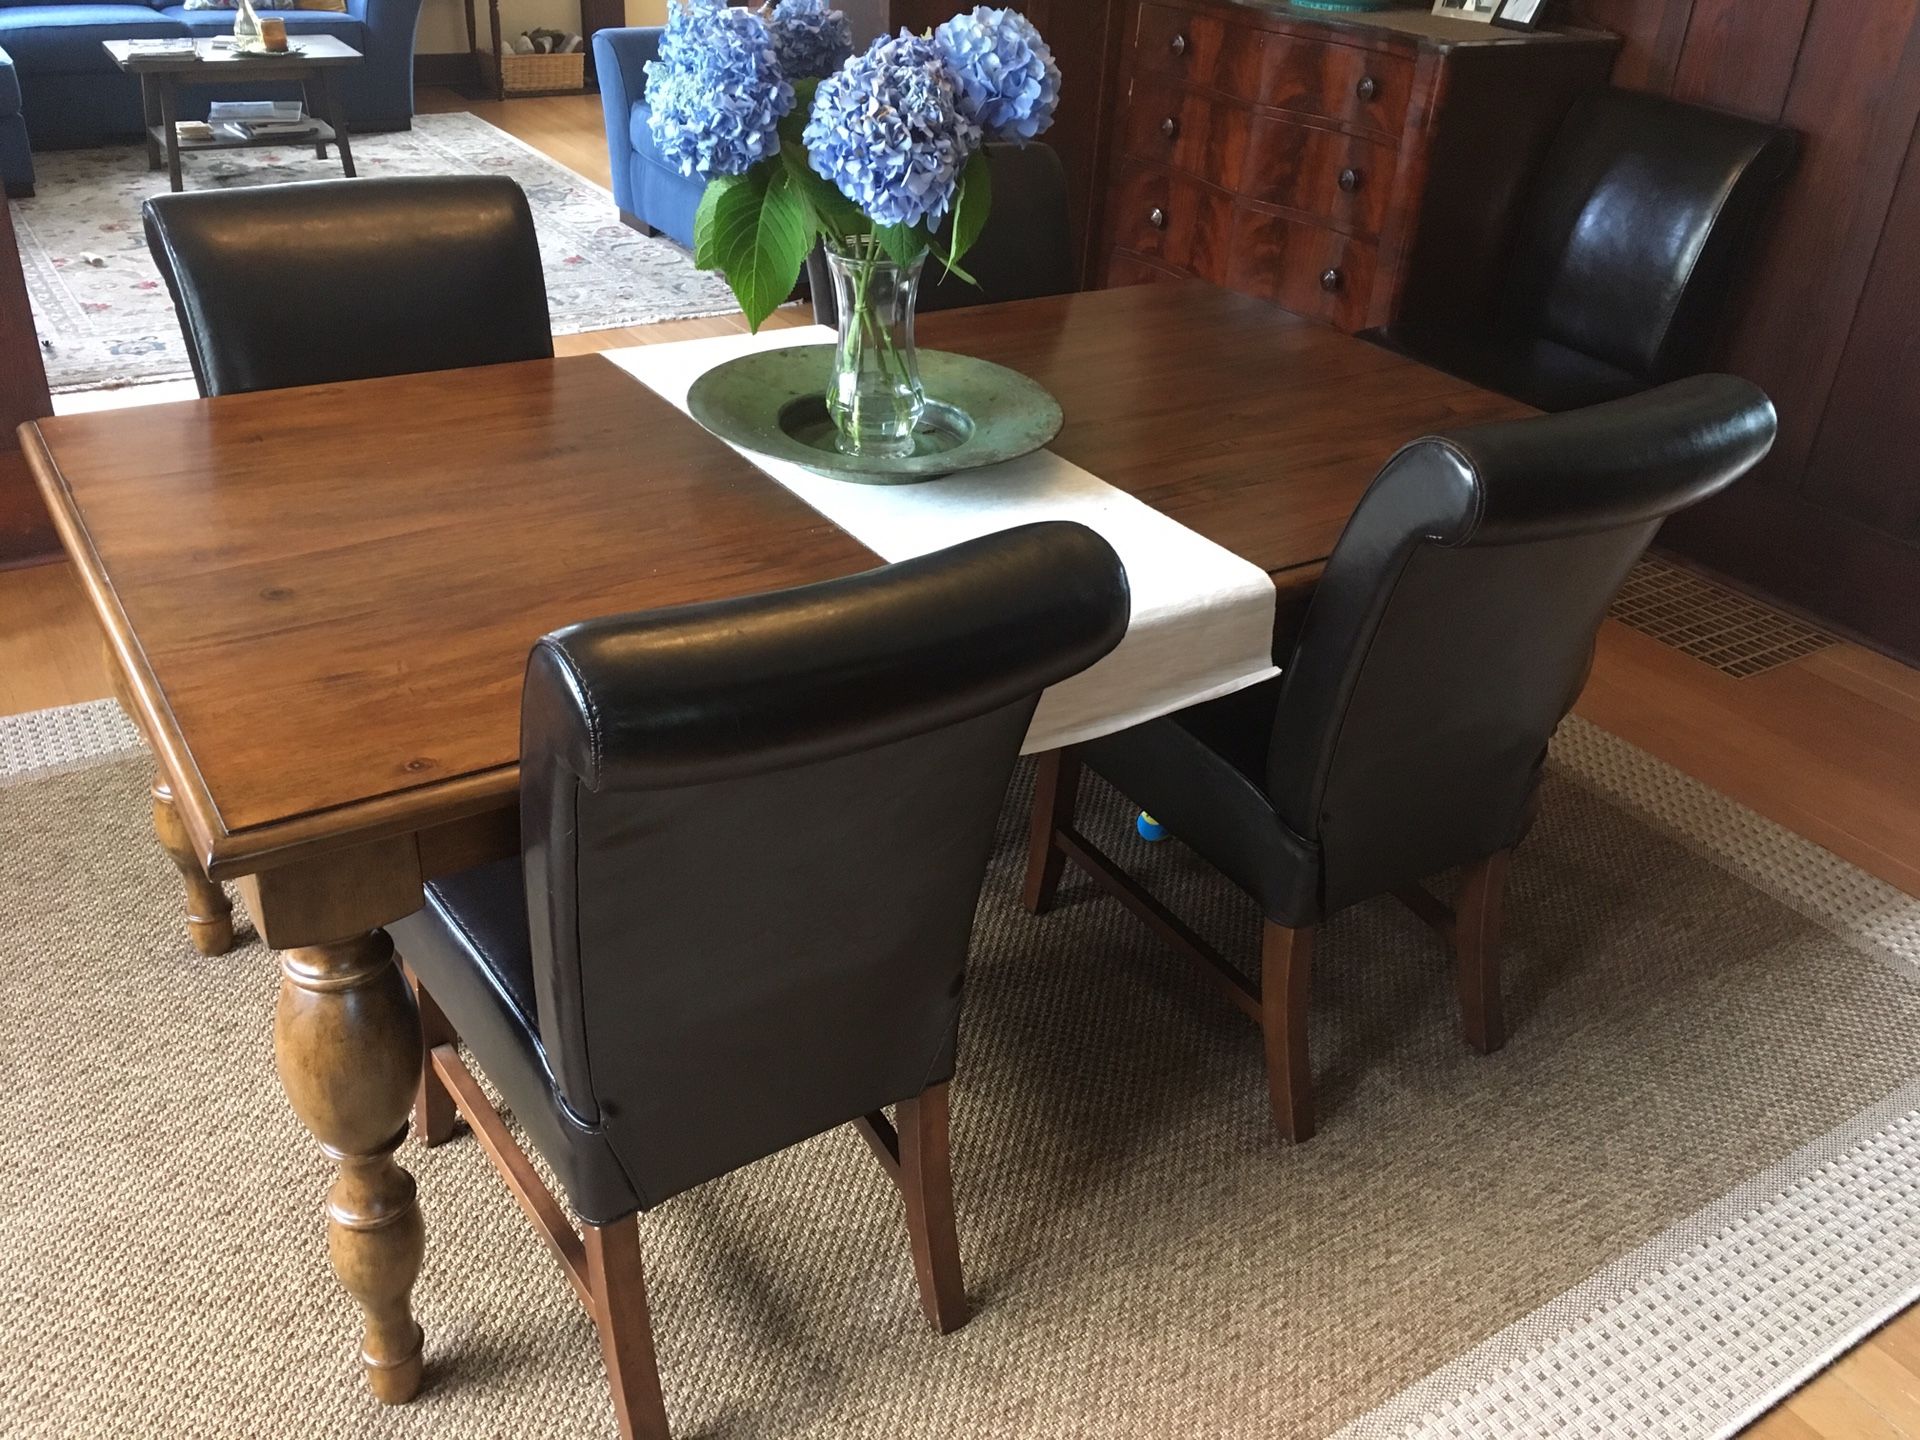 Set of four dining chairs. Dark brown